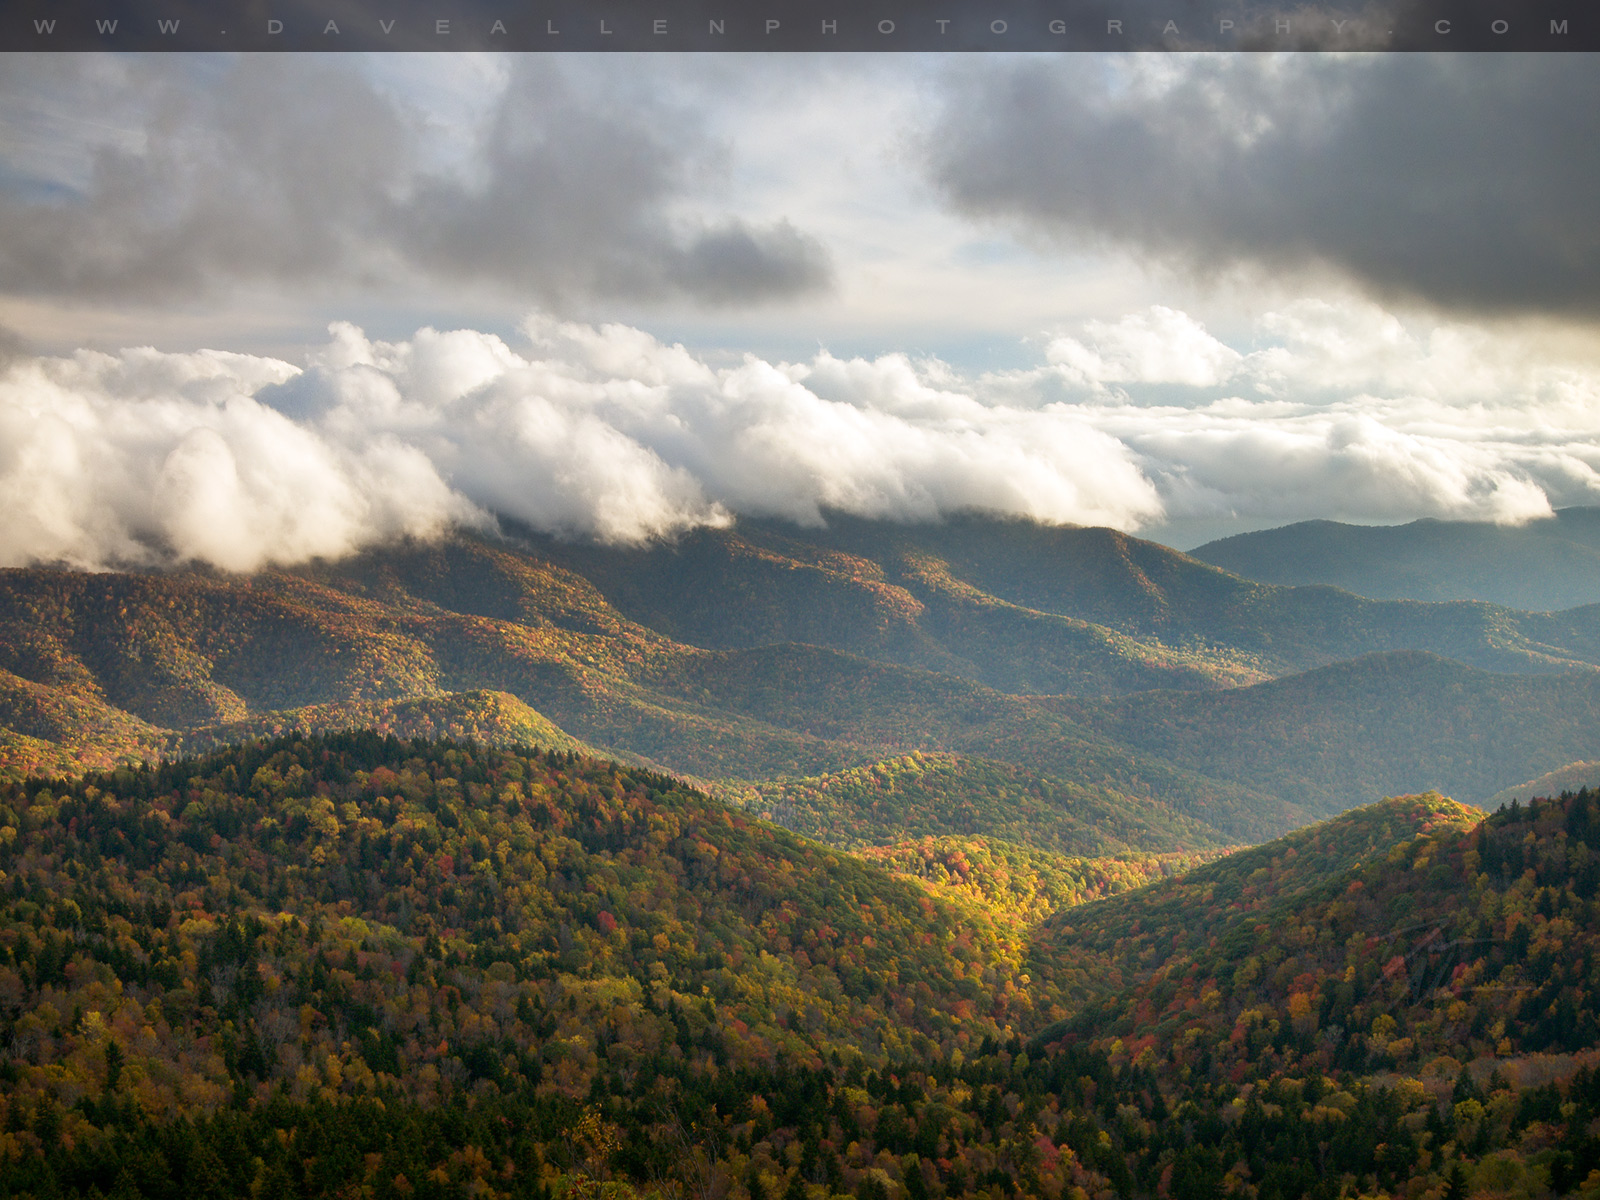 Cowee Mountains Overlook   Blue Ridge Parkway Landscape Photography 1600x1200